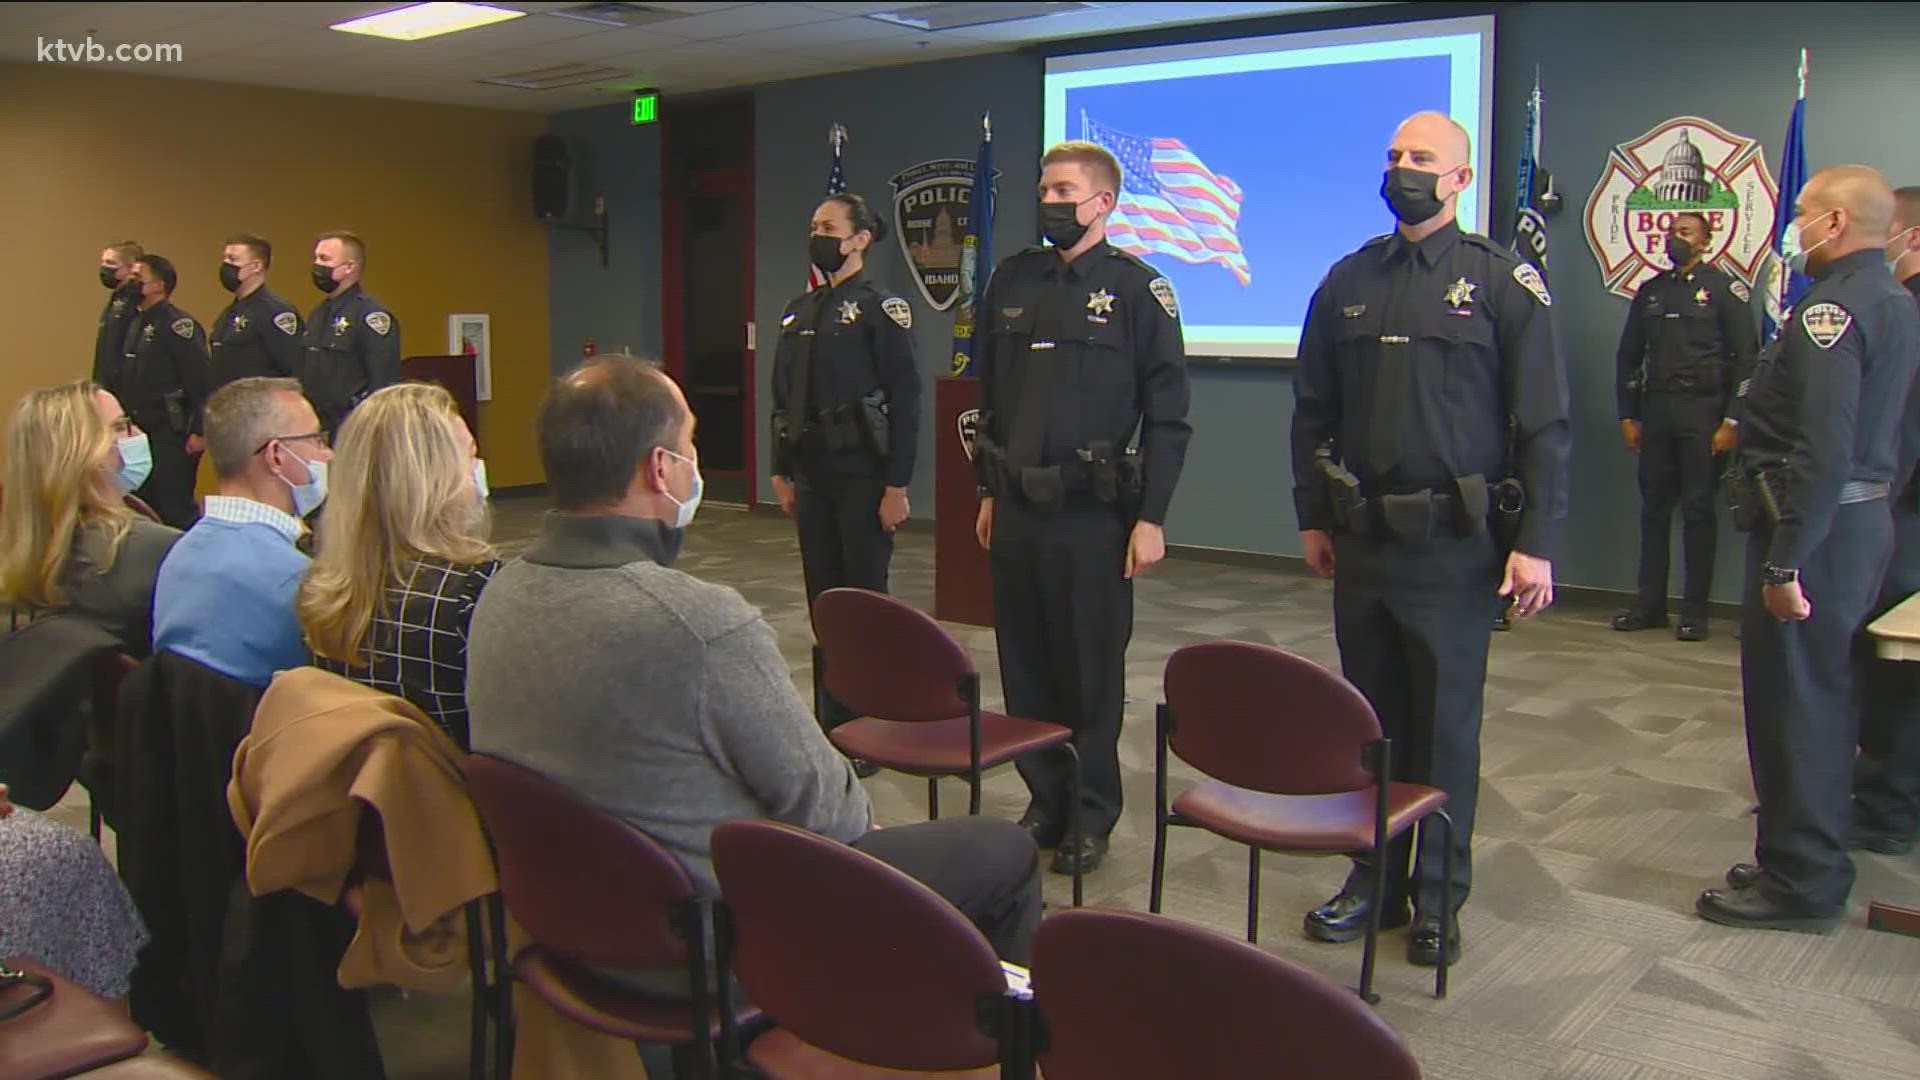 The seven officers were congratulated with a graduation ceremony and took the official oath of office, administered by City of Boise Mayor Lauren McLean.